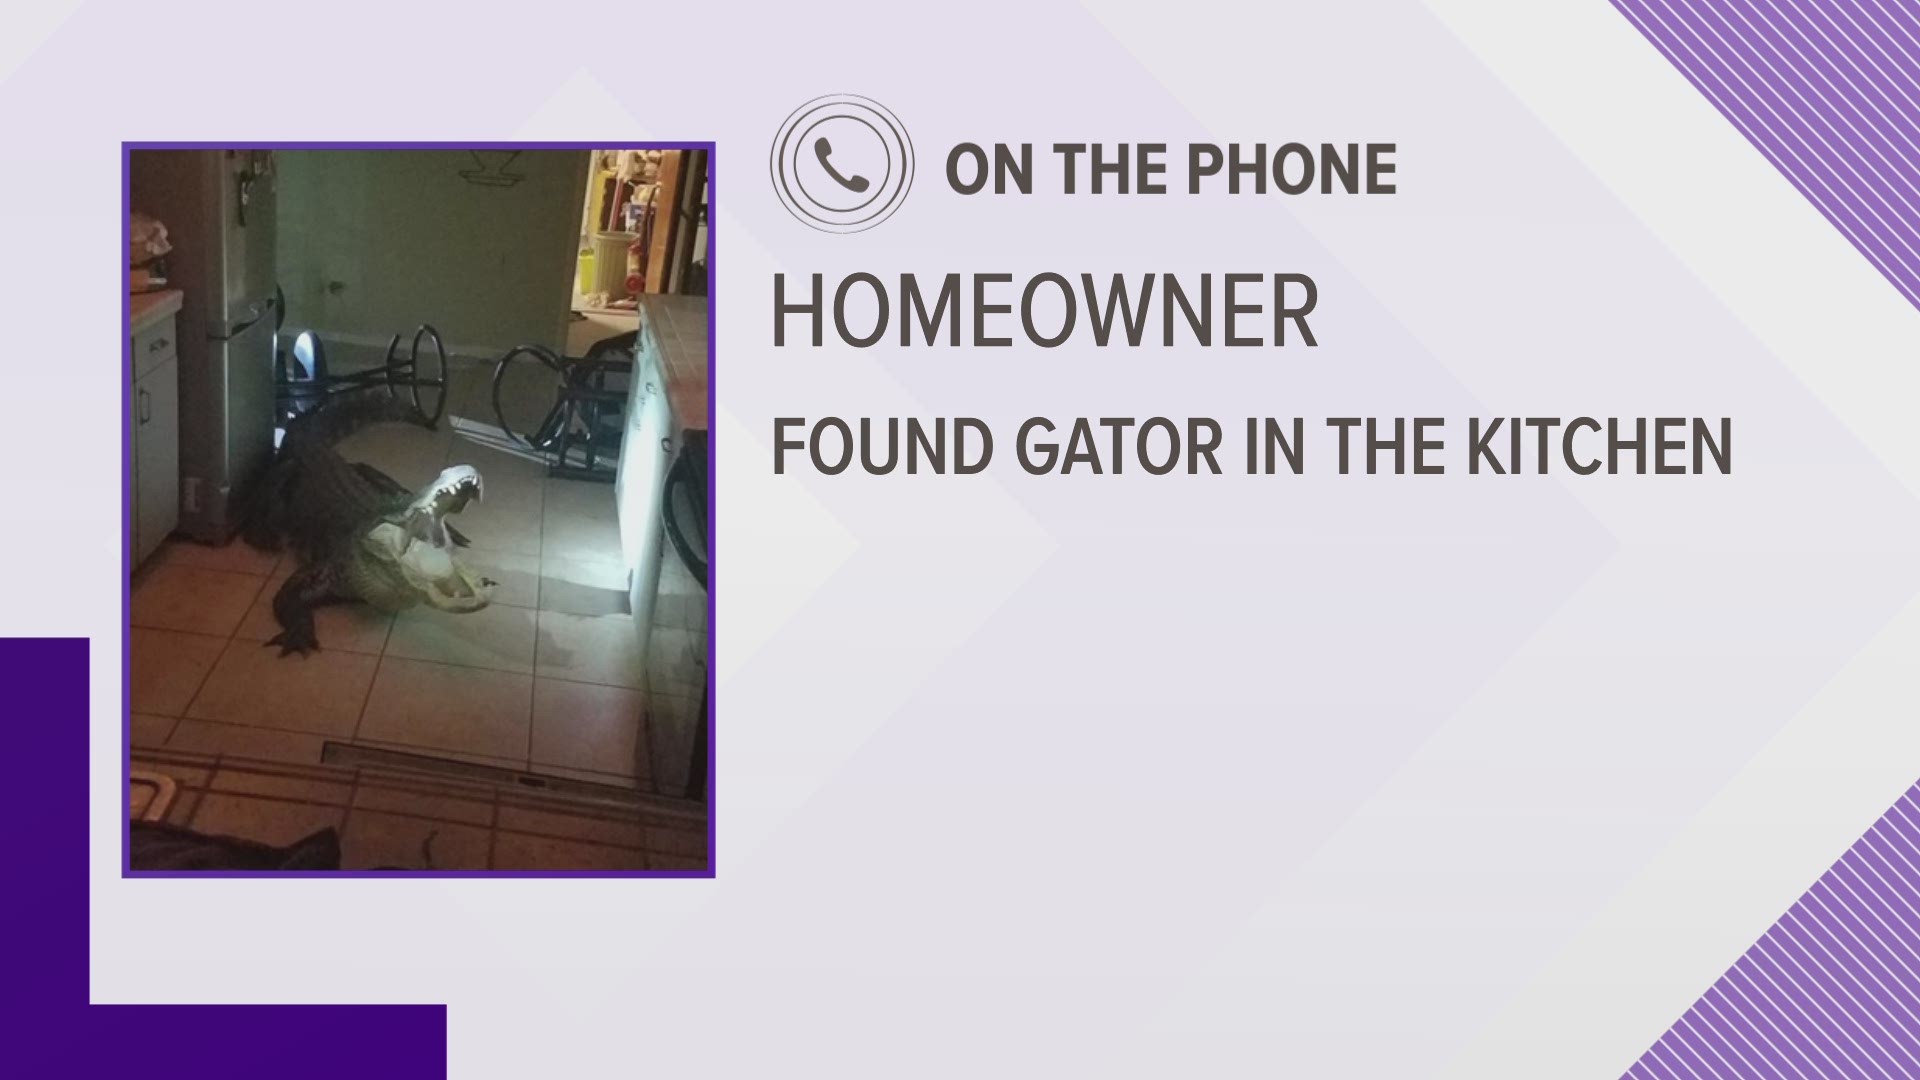 Clearwater police: Clearwater police, this is Matt.
Homeowner:  Hey Matt, I have a gigantic alligator that came in through my garage and is sitting in my kitchen. A huge one.
Clearwater police: I’m sorry- is it in your house? 
Homeowner: Yes! It’s huge! 
Clearwater police: You said it’s in your kitchen?
Homeowner: Yes! I don’t know how it got here but it’s here. 
Clearwater police: Okay… Alright. Are you safe? Are you in your bedroom? 
Homeowner: Yes, I shut the door and I’m in my bedroom. I’m not leaving here until you get here. 
Clearwater police: Okay. We’re on the way ma’am. The newspaper deliverer actually called in because she saw it kind of hanging around there. So, we’re on the way. Okay, alright. We have a couple officers on the way there. Just stay inside the room with the door shut and locked. 
Homeowner: I’m not going anywhere, Matt.
Clearwater police: We’re going to…uh... are you the only one in the house? 
Homeowner: Yes. 
Clearwater police: Okay, alright. Like I said, we’re on the way up there ma’am. We’ll be up there in a few minutes okay? 
Homeowner: Okay—I’ll just sit here. 
Clearwater police: Okay, keep your phone on. We’ll call you when we get up there okay?
Homeowner: Okay. I’ll have my phone on.
Clearwater police: Okay, thank you.